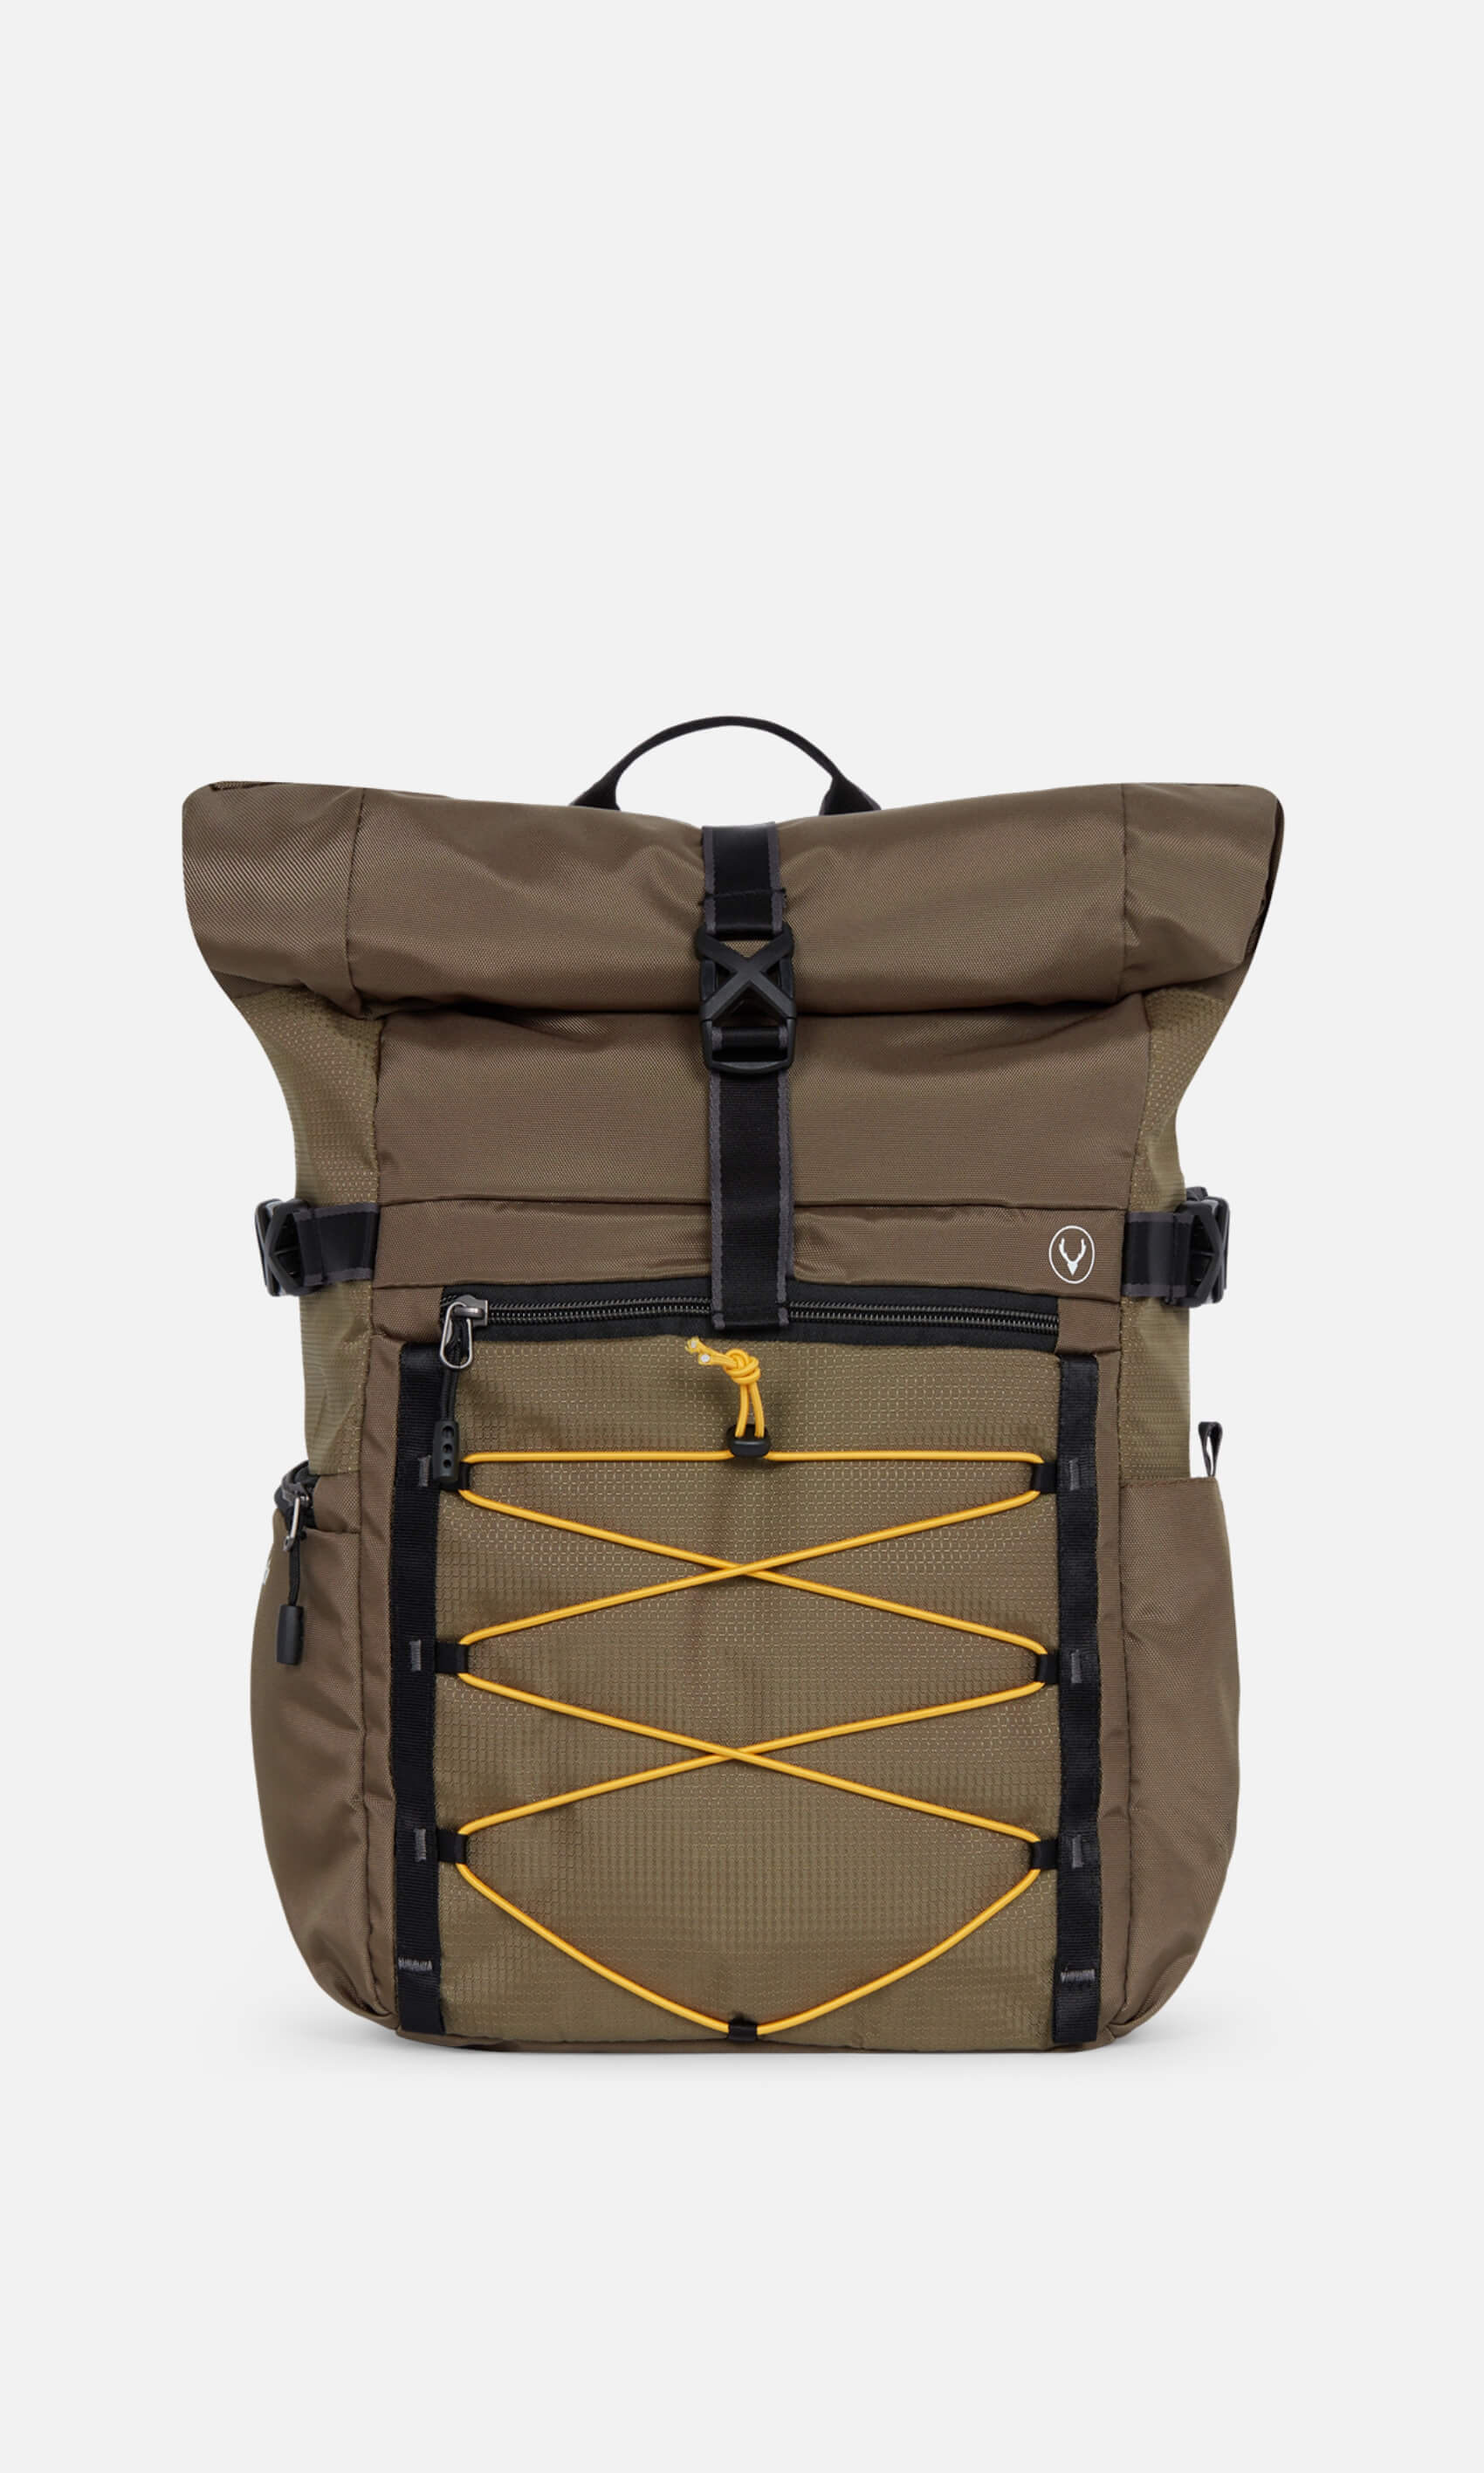 View Antler Bamburgh Roll Top Backpack In Khaki Size 28 x 605 x 155 cm information